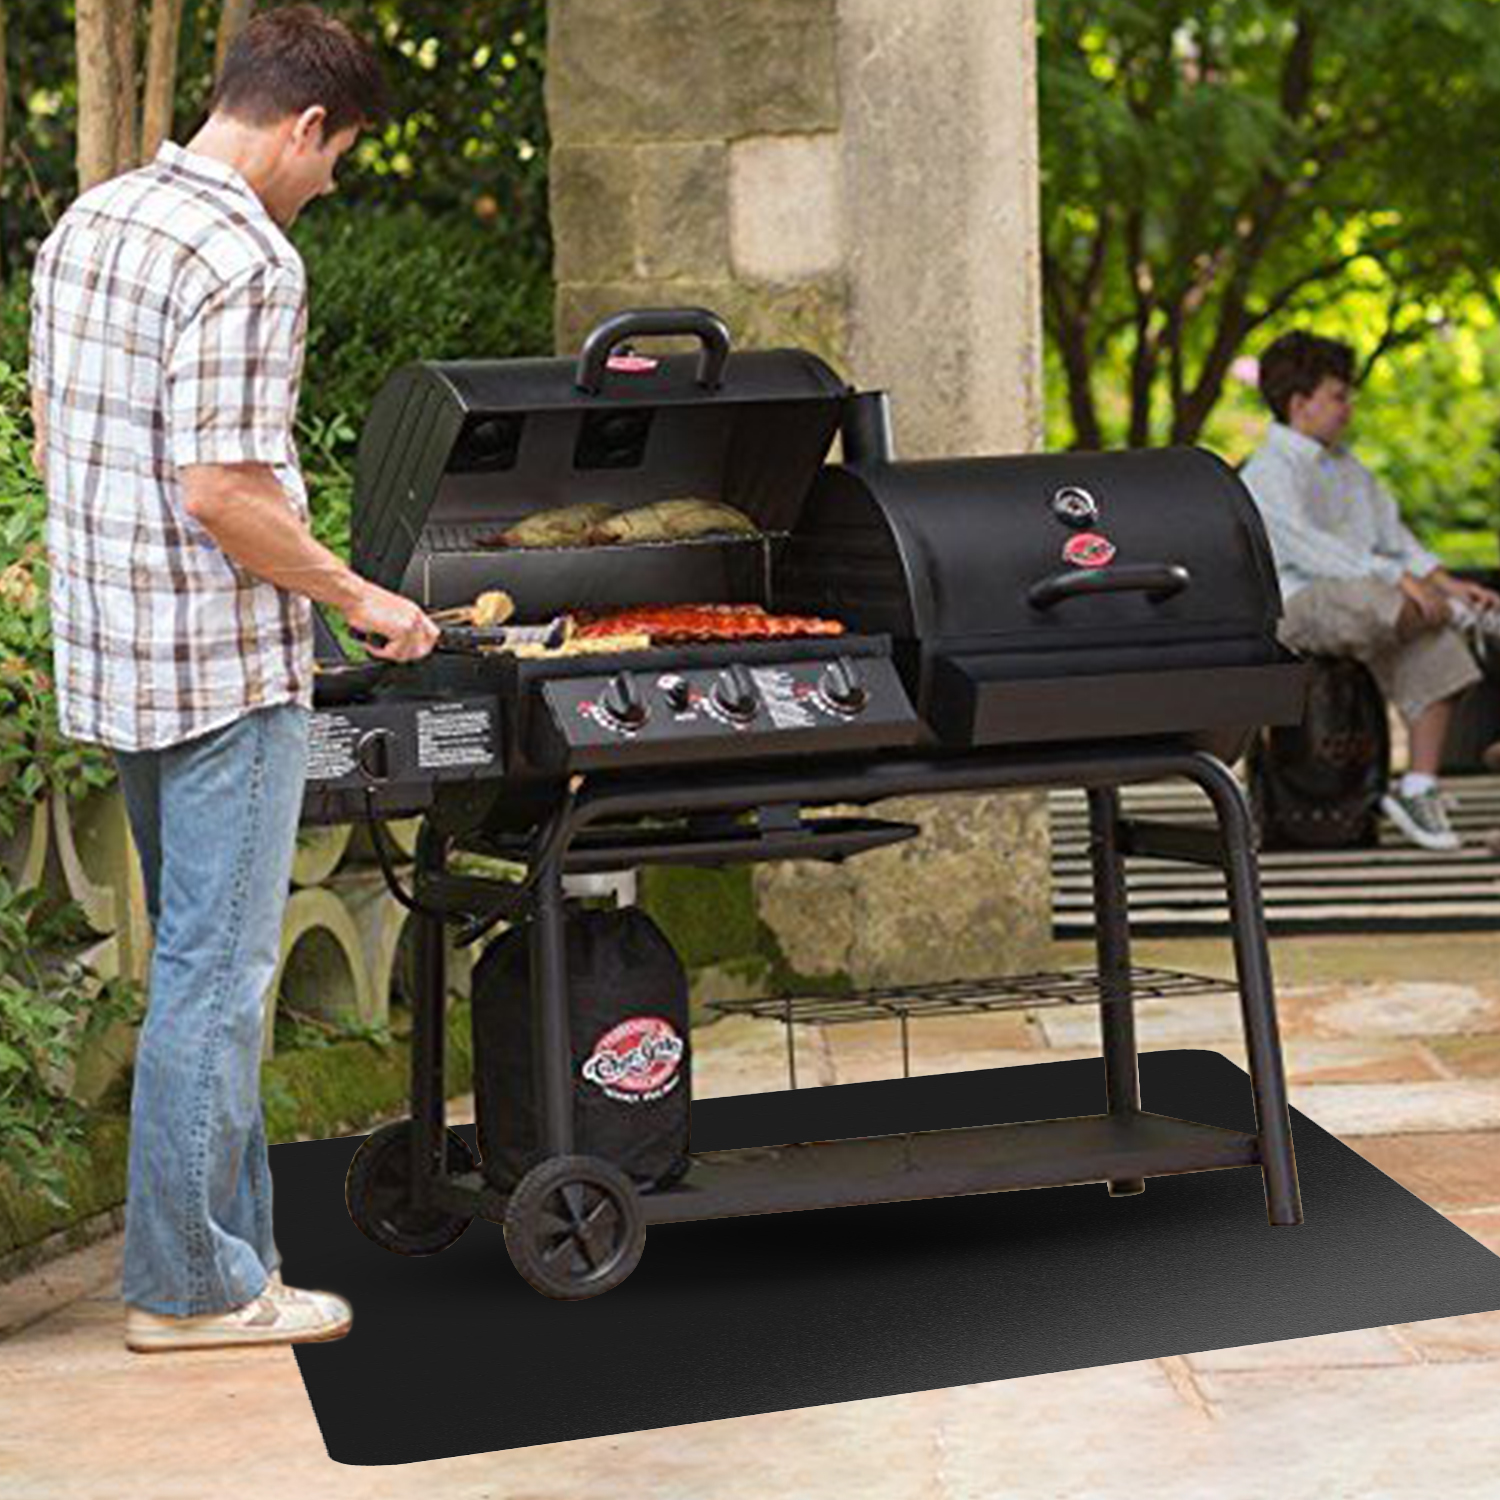 Custom Size Anti Slip BBQ Under Grill Mat Black Deck Protector for Outdoor Use